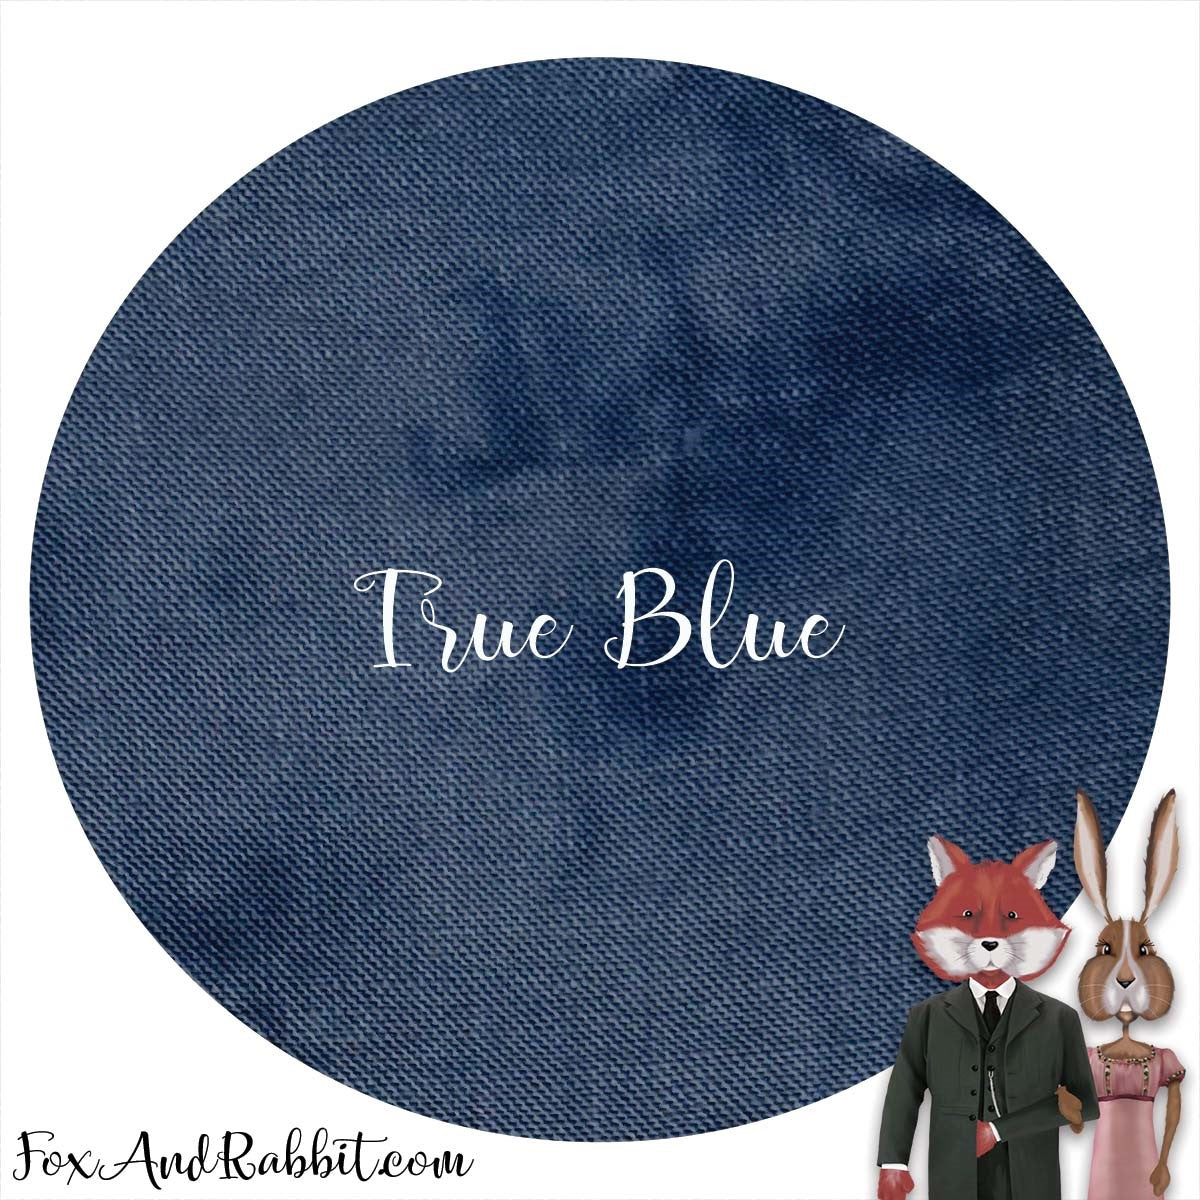 Fox and Rabbit Hand Dyed Linen - True Blue 46 count